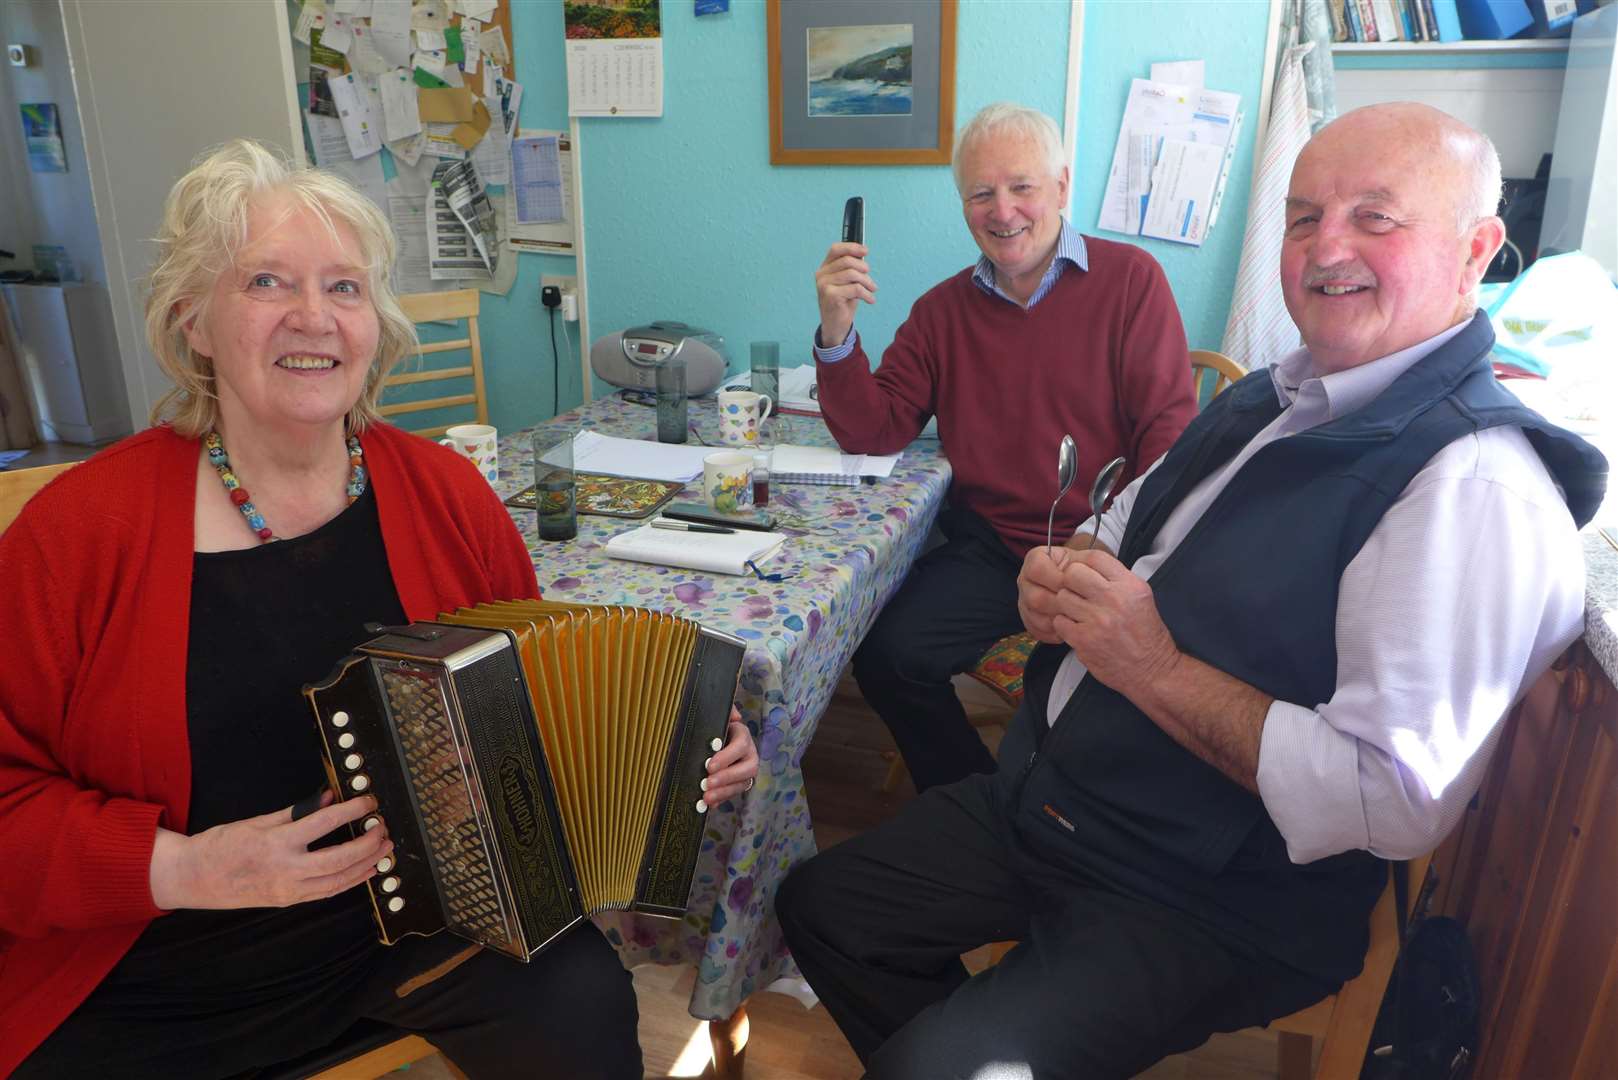 Nancy Nicolson, Eric Farquhar and Willie Mackay at the second of the Wick kitchen ceilidhs held by the Caithness Macular Society Support Group.